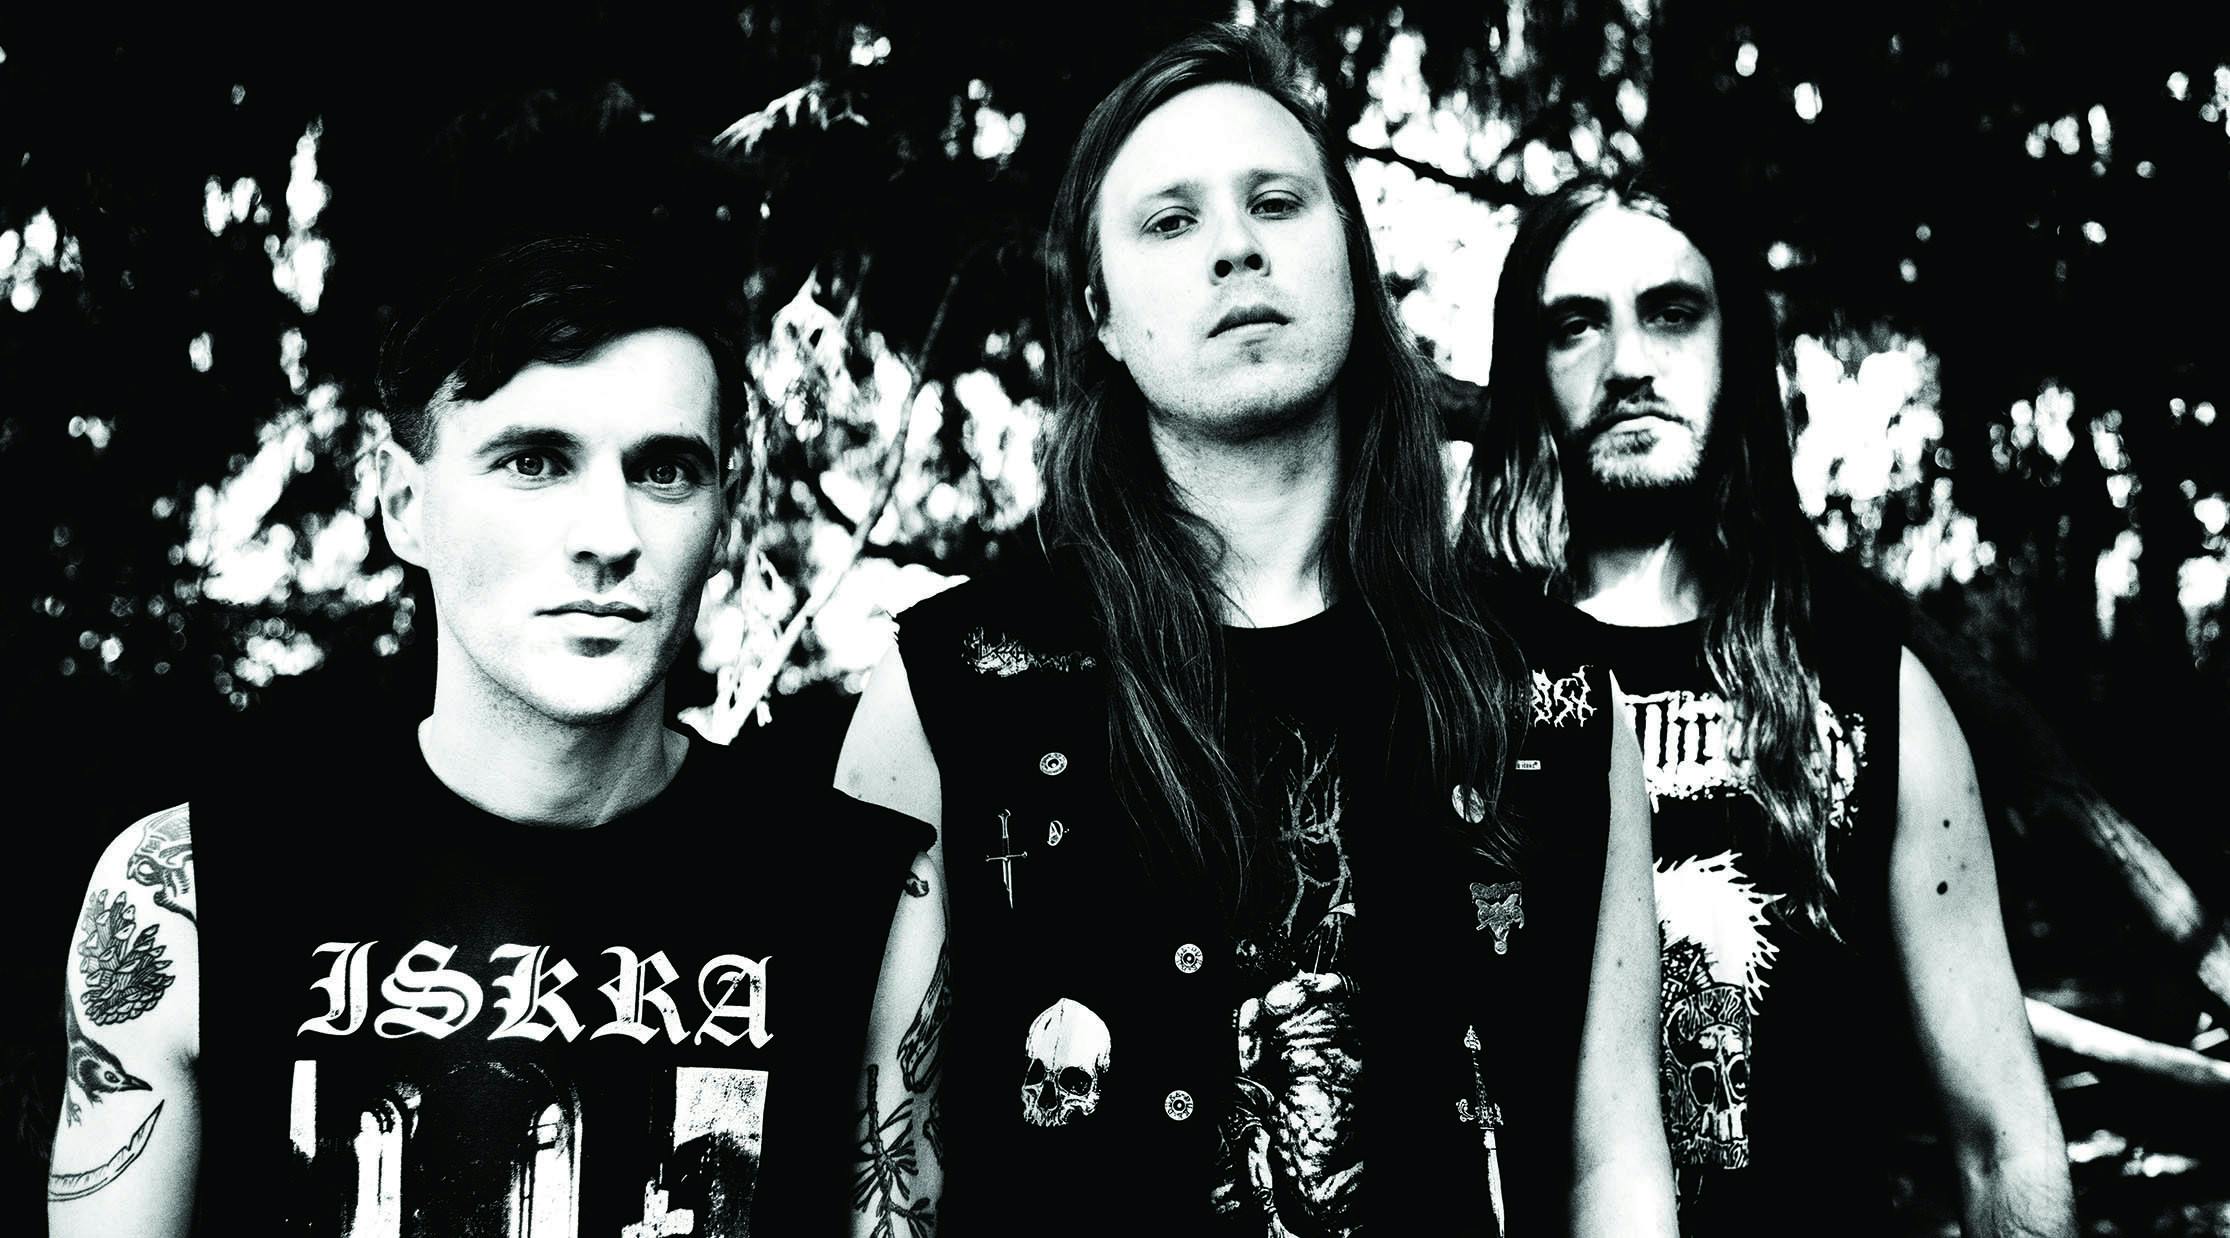 Anarcho Black Metallers Dawn Ray'd Channel The Spirit Of Revolution In New Video